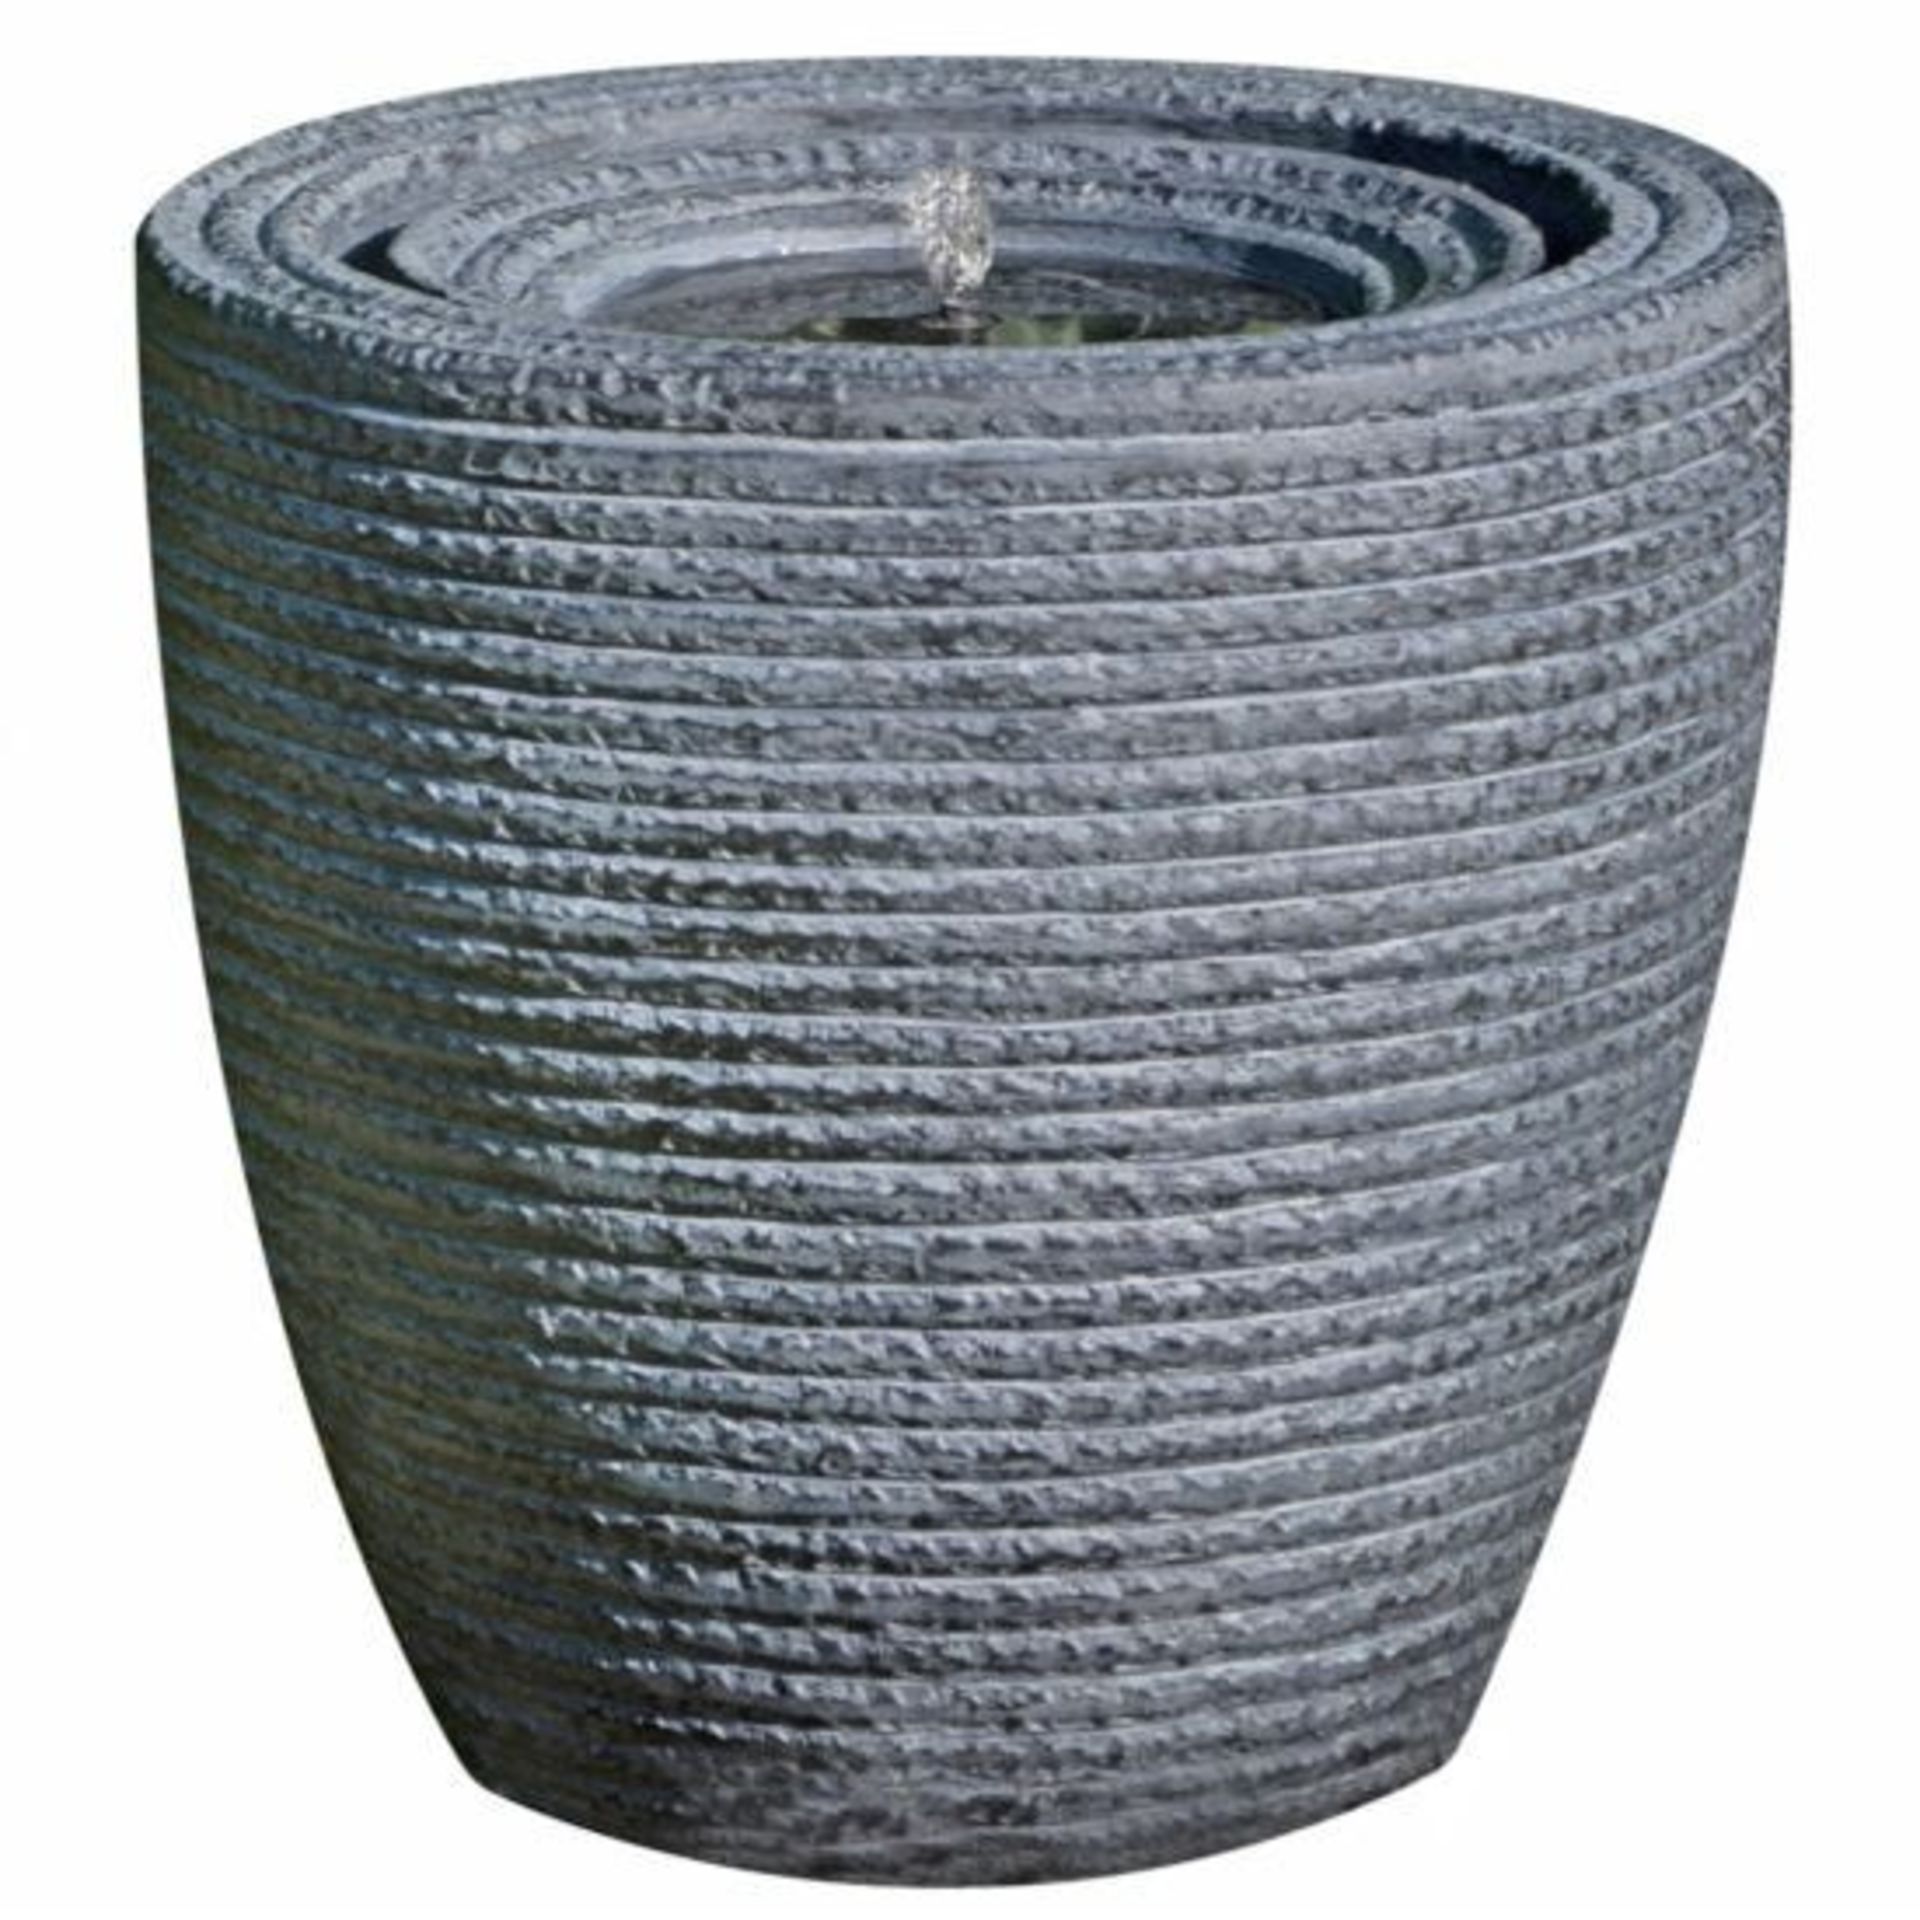 BRAND NEW OUTDOOR LIVING COMPANY 33CM SOLAR VASE WATER FEATURE DIA. 34 X 33CM